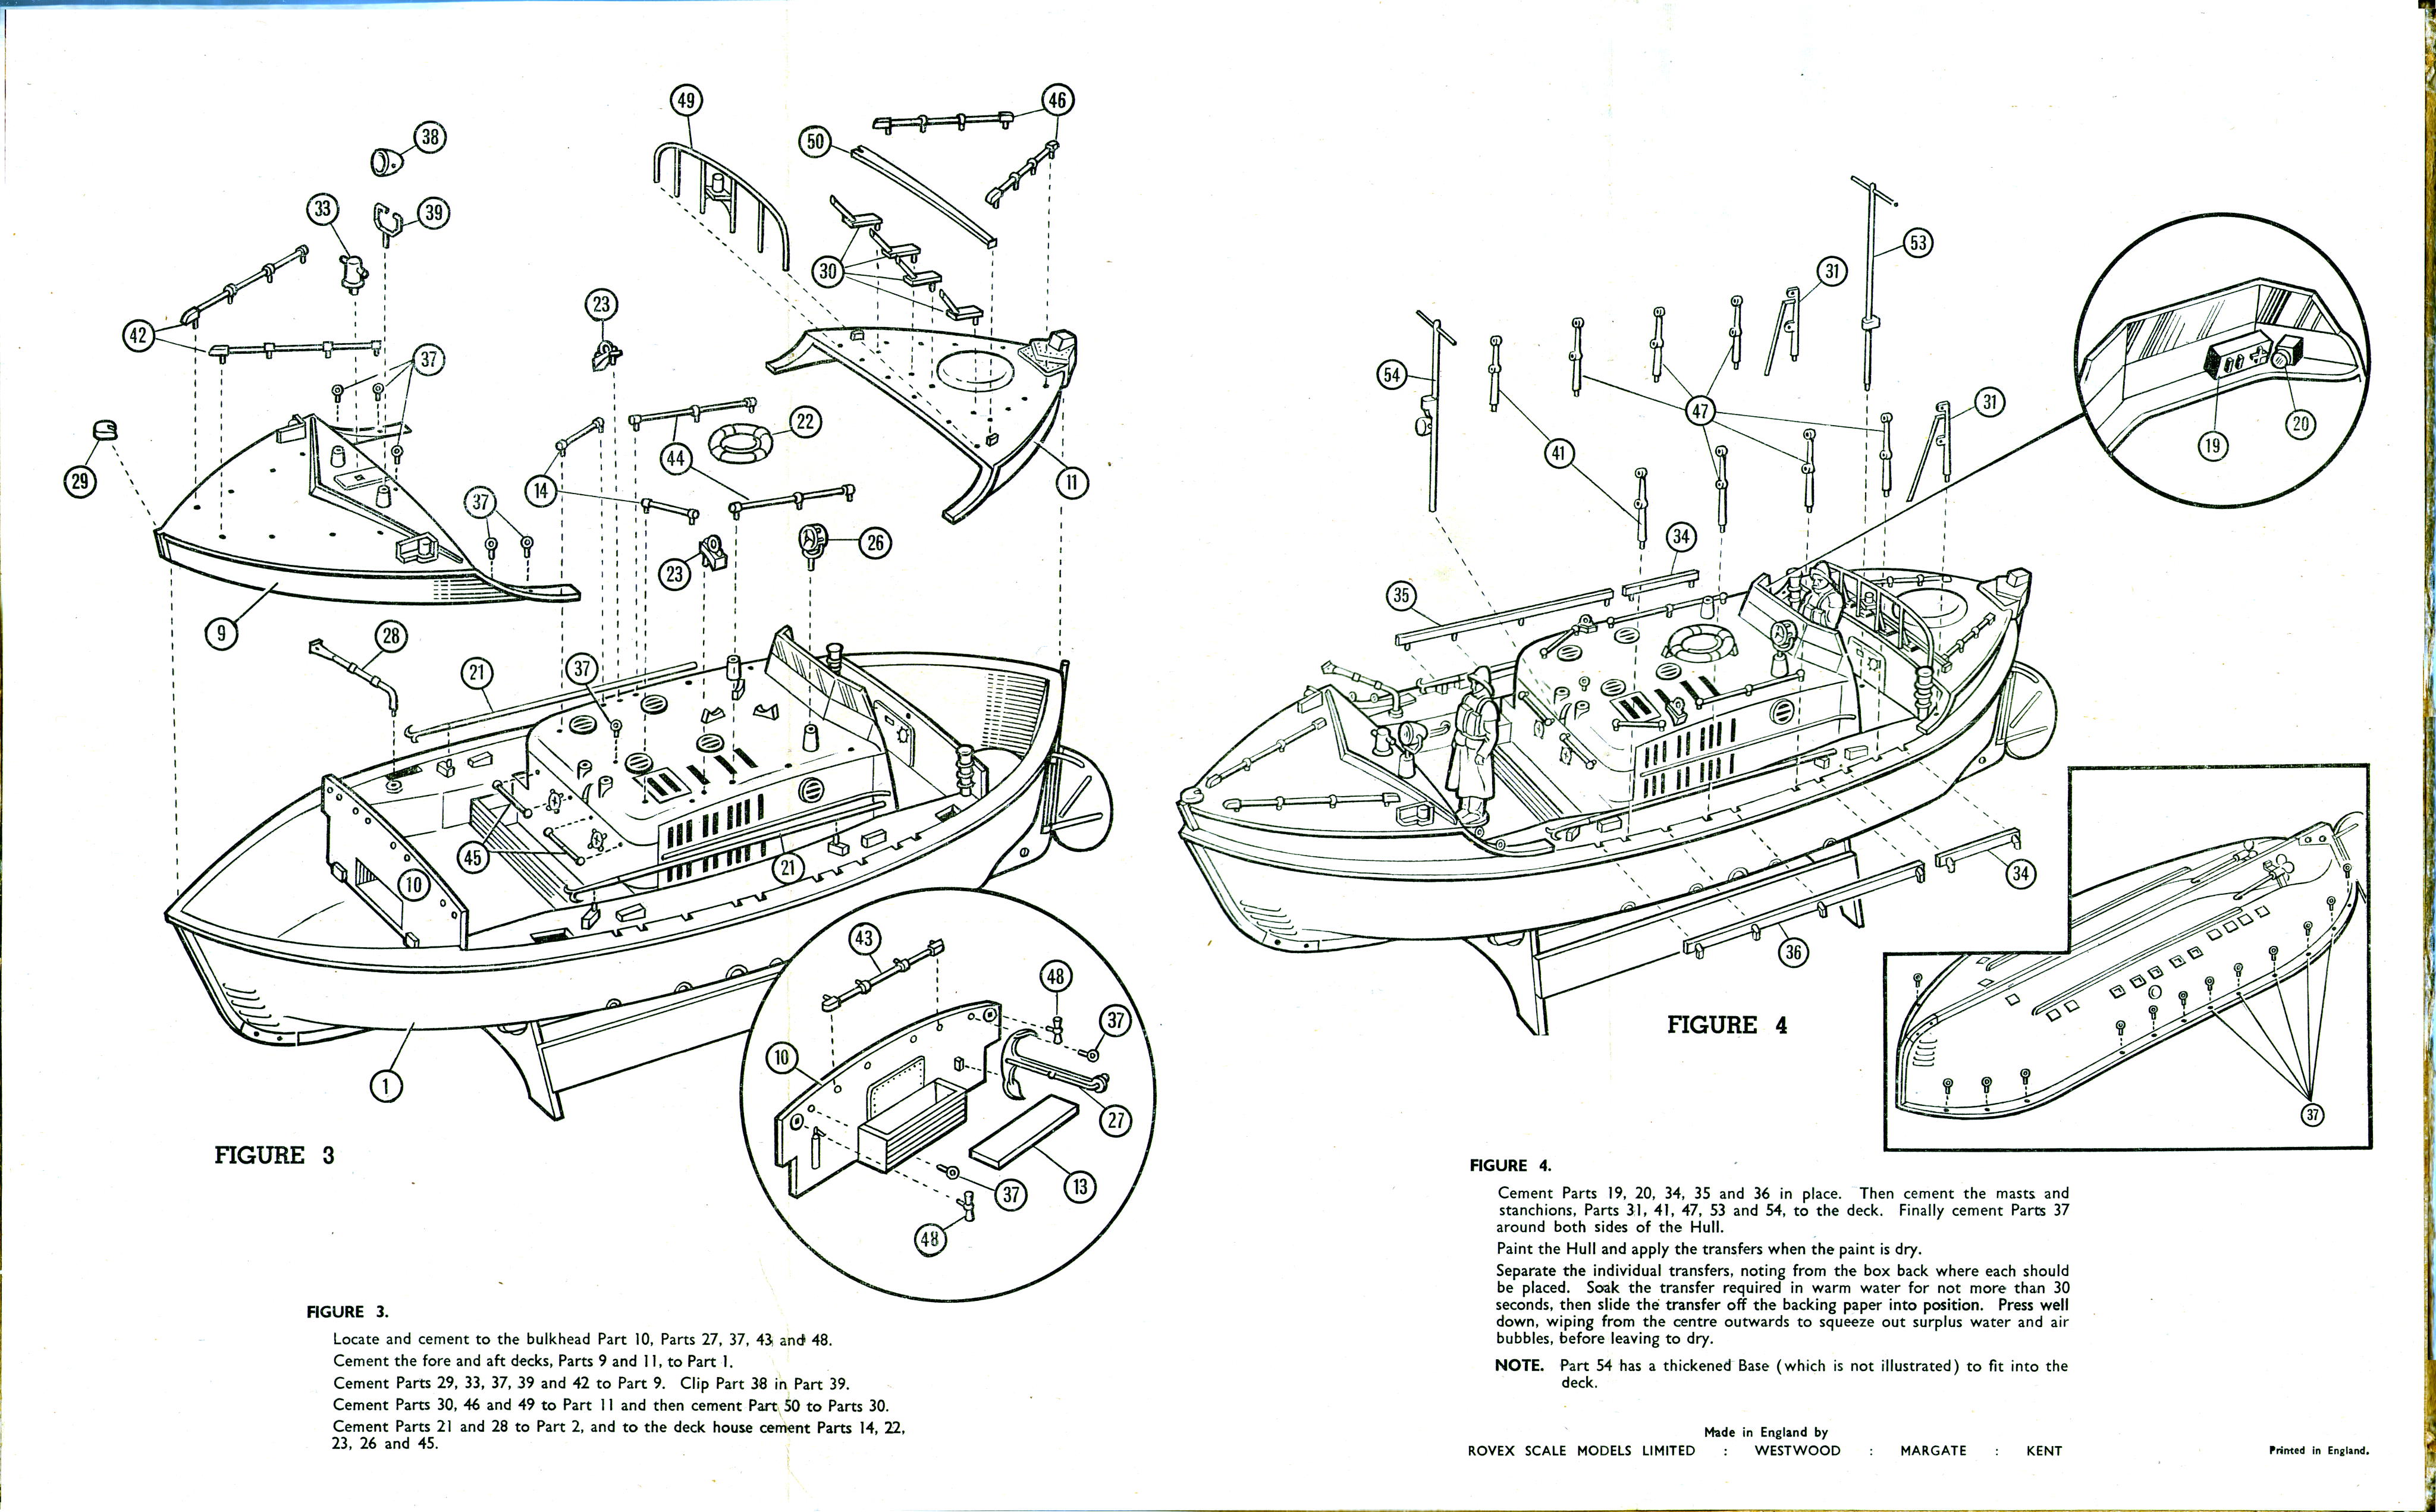 FROG F129 North Sea Lifeboat 37ft. Oakley self-rightning type RNLI lifeboat, Rovex, 1967, assembly instructions list 1